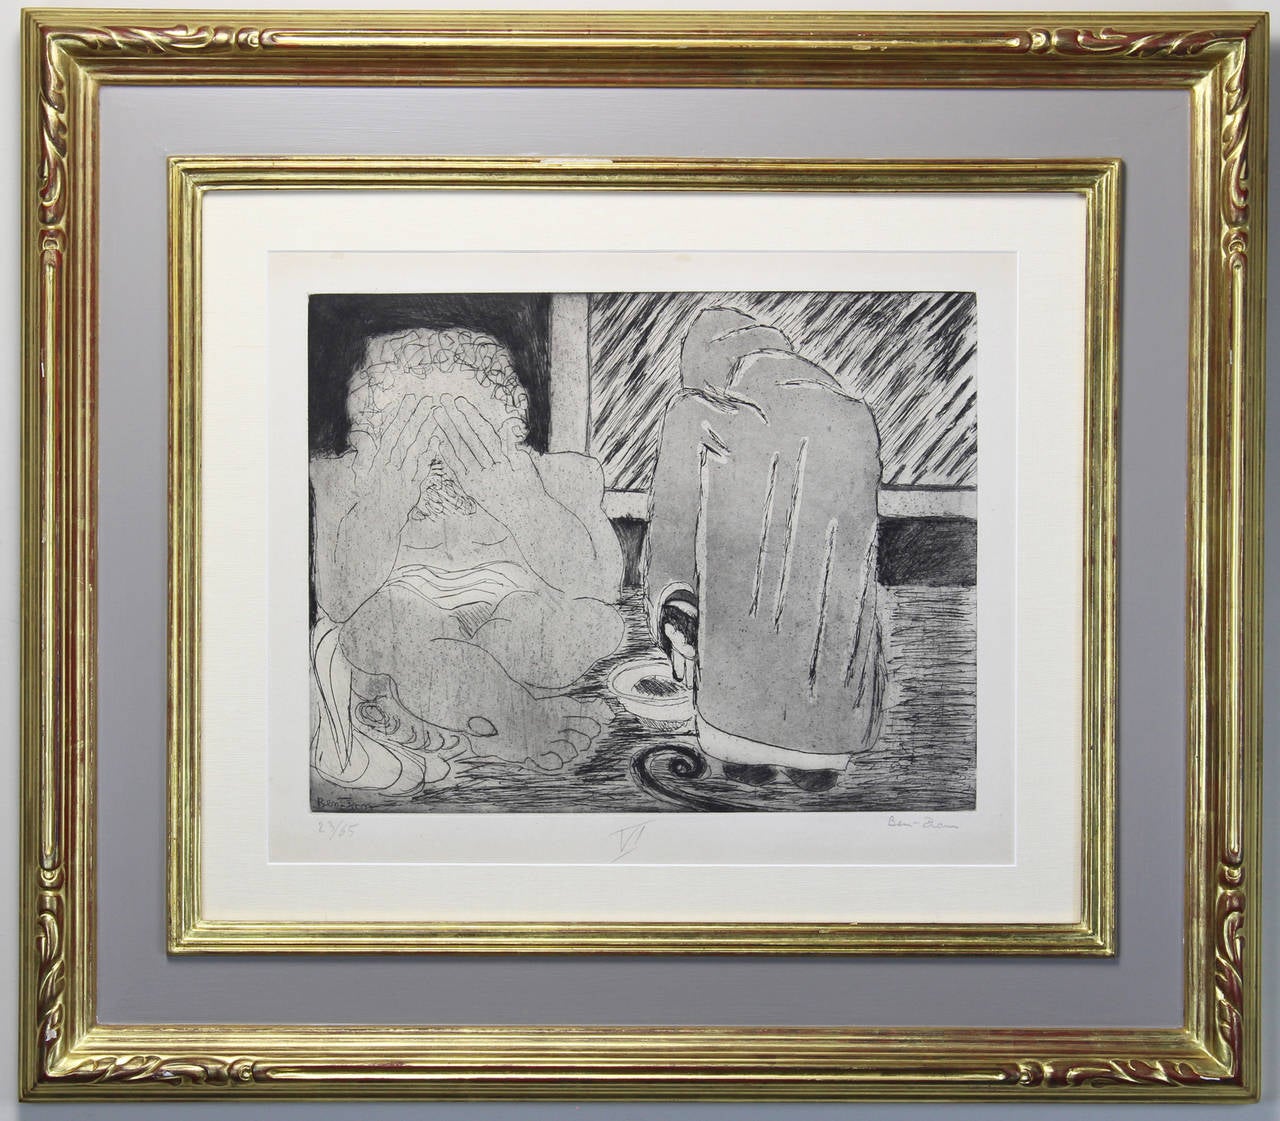 A large signed and numbered limited edition engraving dating from the 1930s by Ben-Zion. Zion was a member of the Expressionist Group 